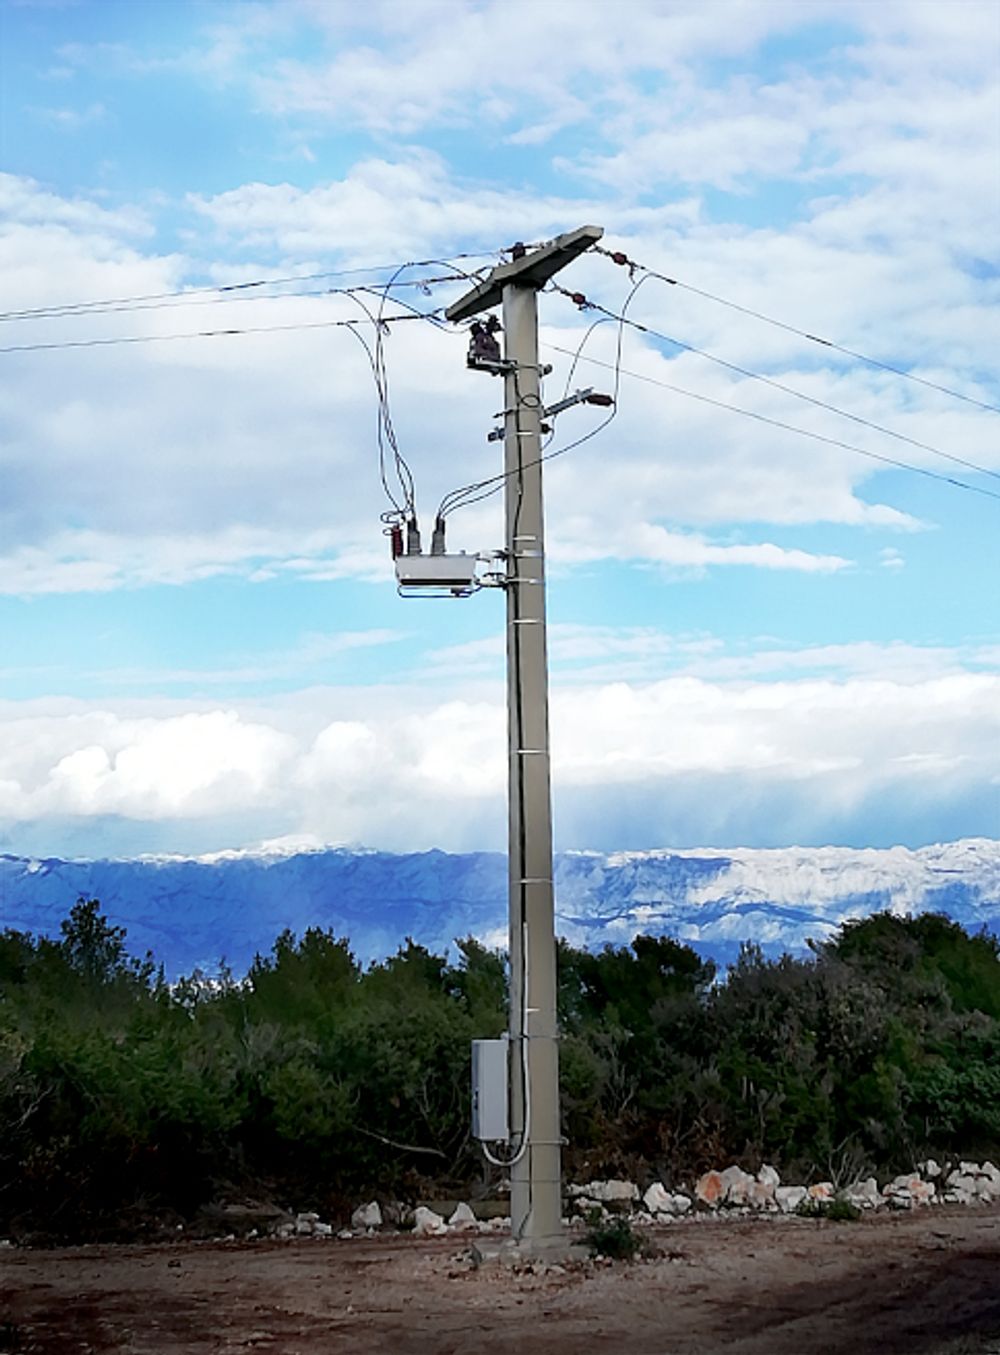 NOJA Power OSM Recloser Installation with snow mountains in the background